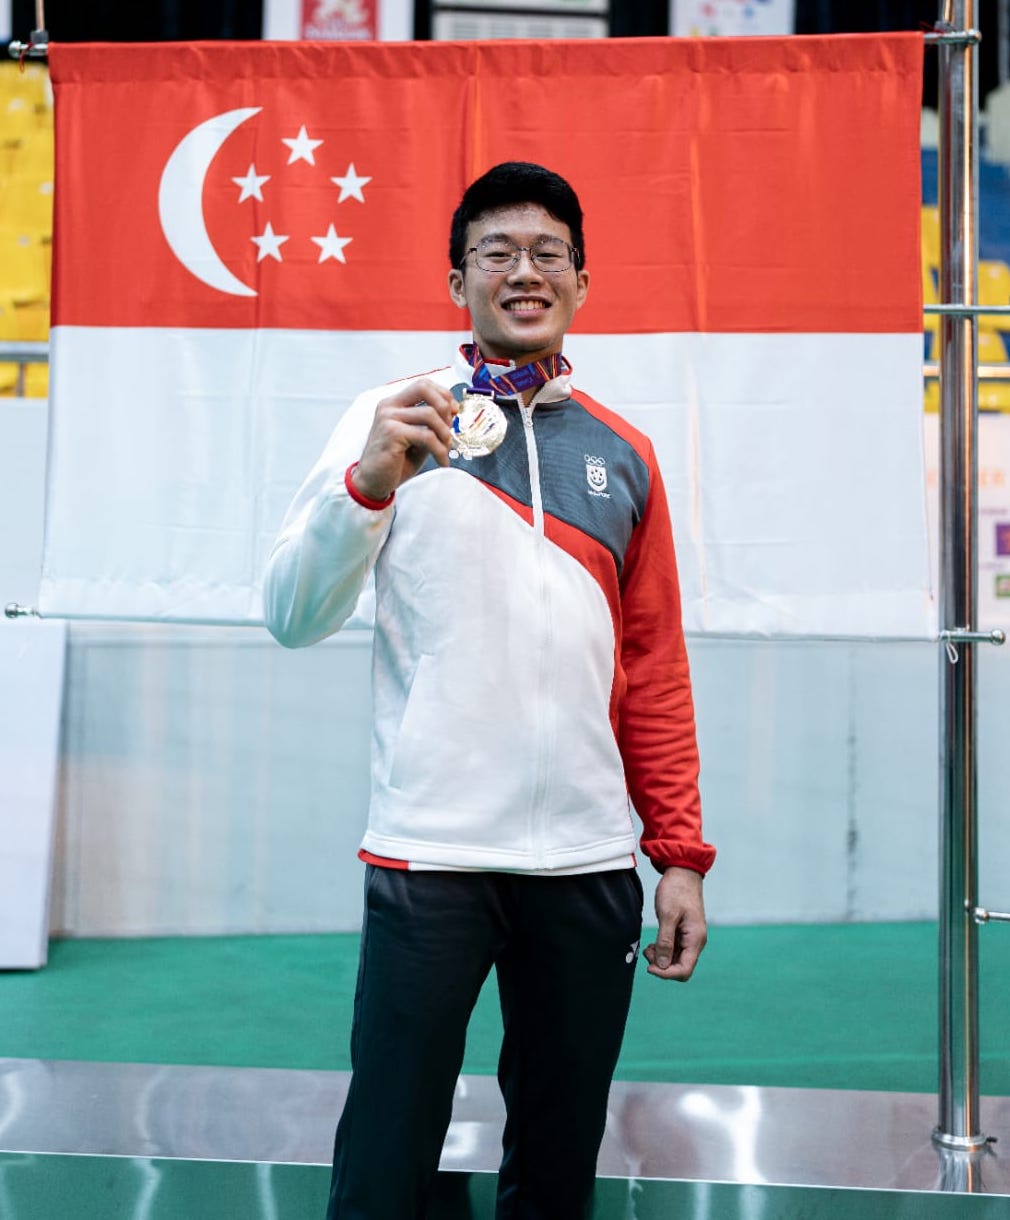 CPL (NSF) Noah proudly displays his gold medal at the SEA Games